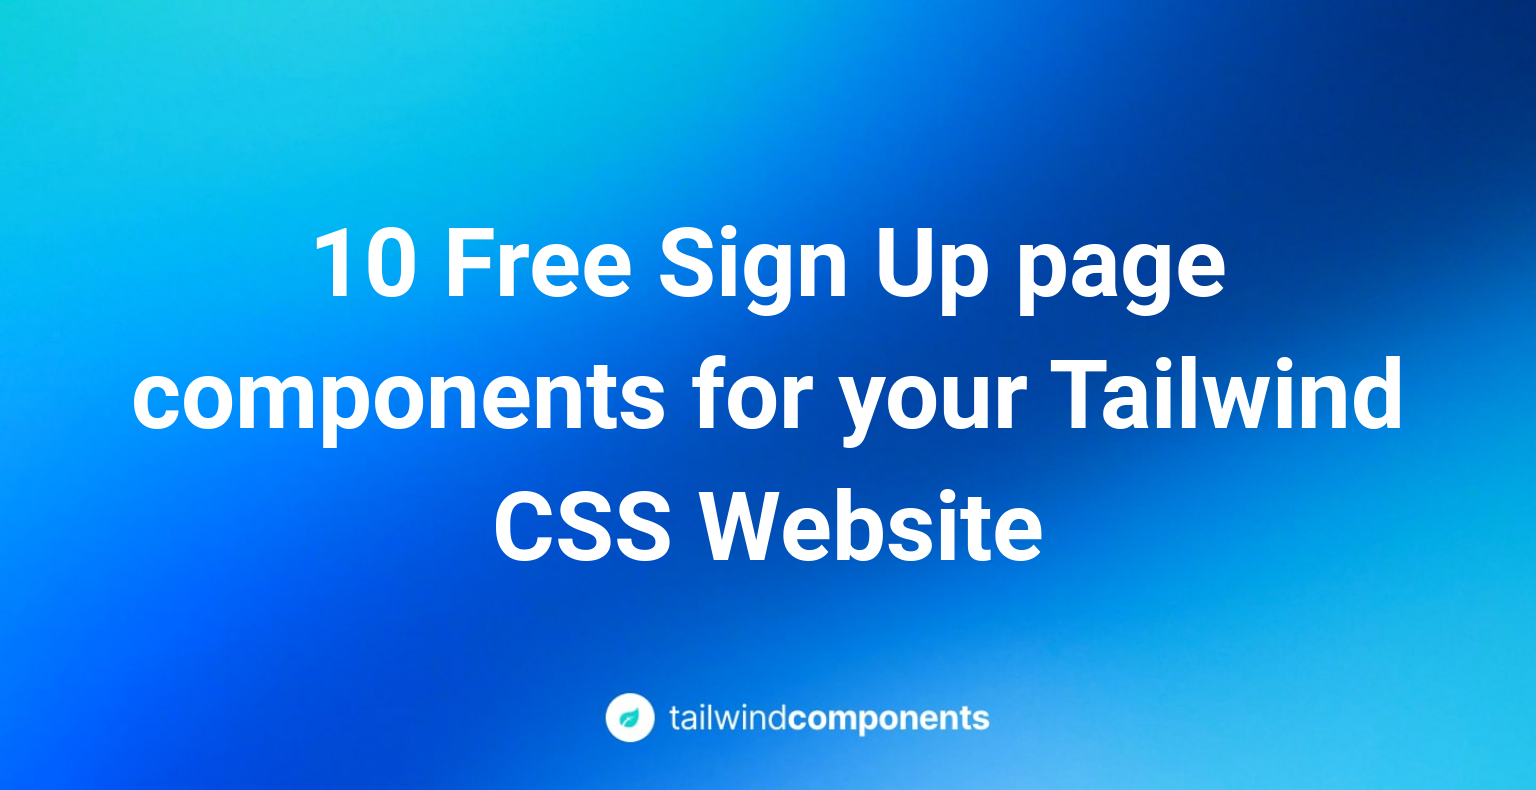 10 Free Sign Up page components for your Tailwind CSS Website